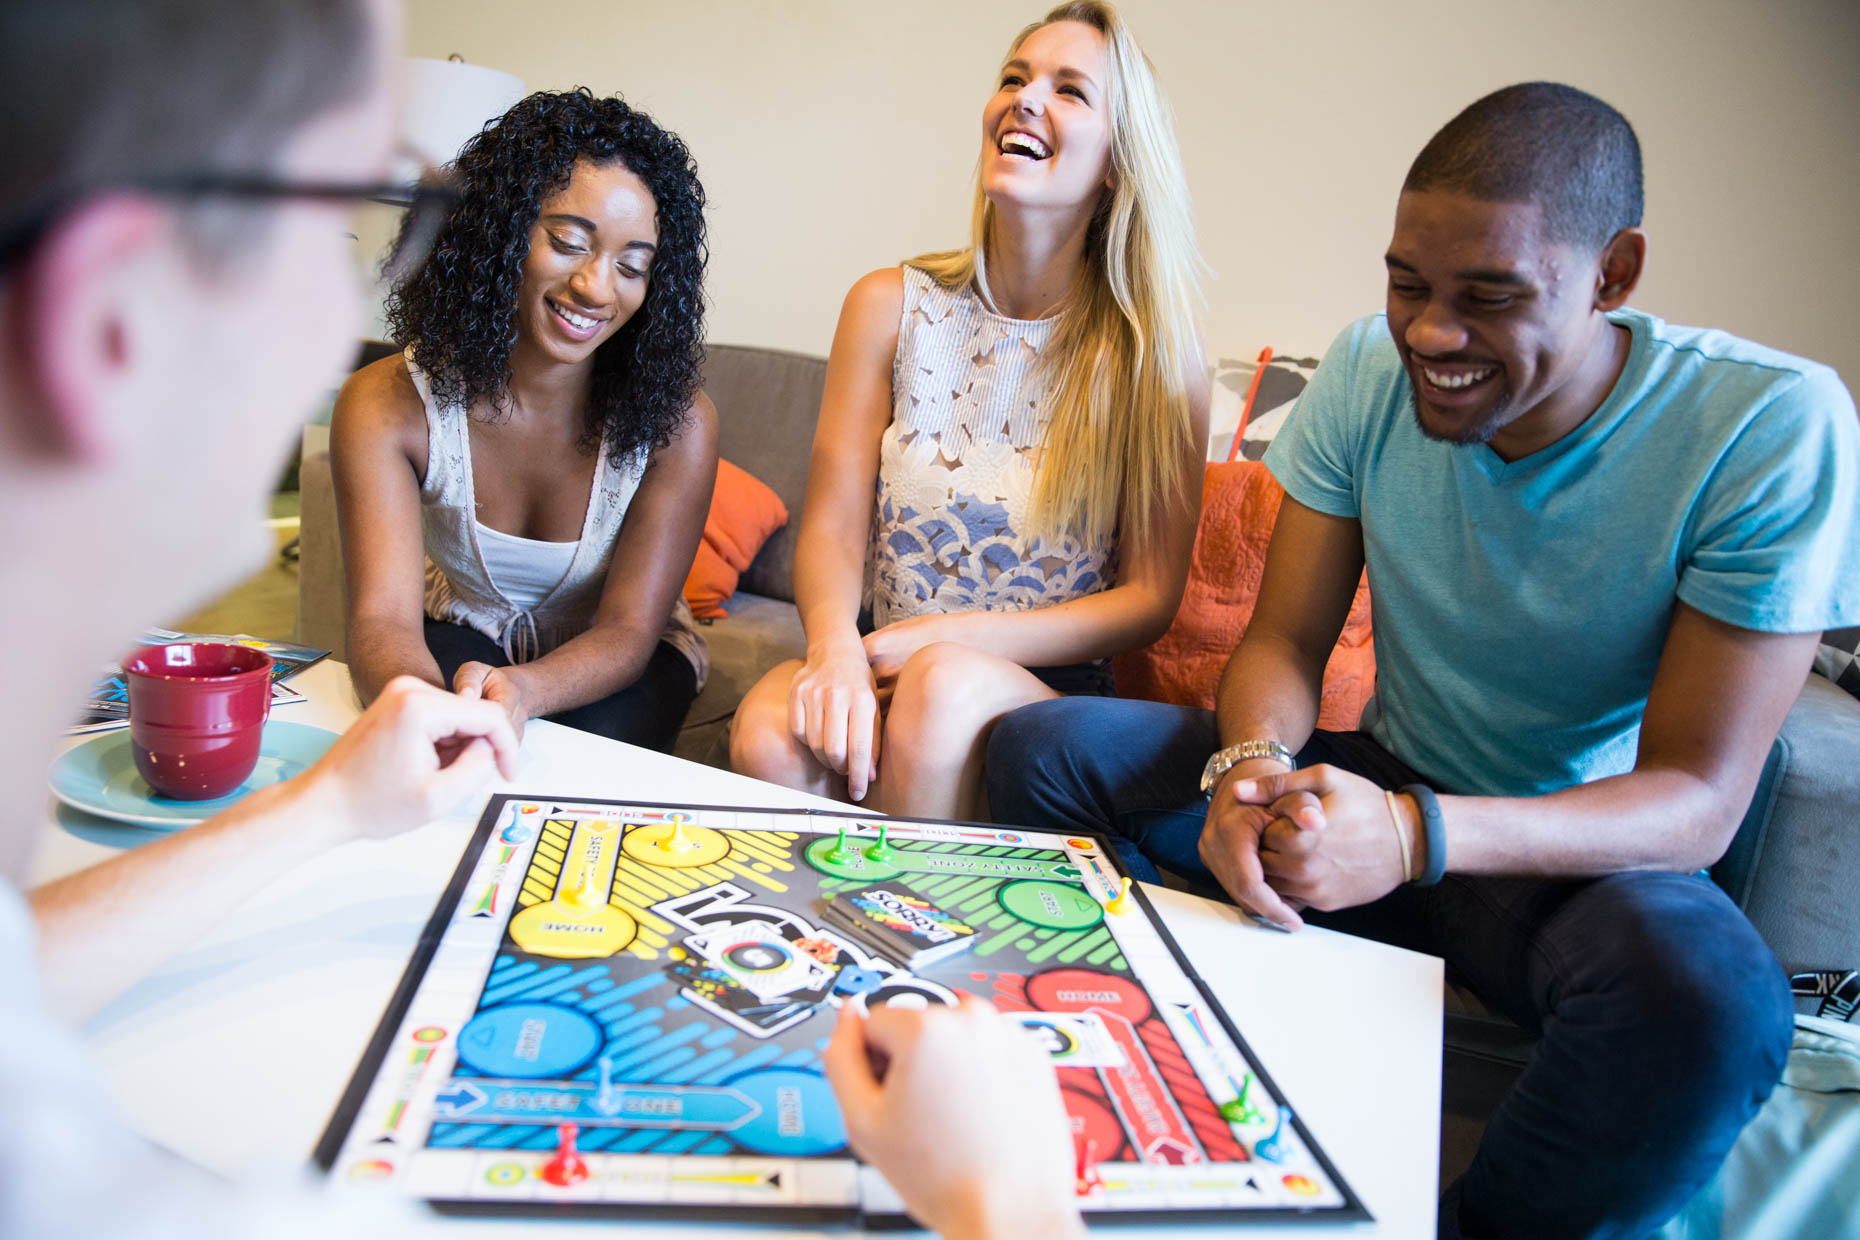 College students playing a board game in dorm room.